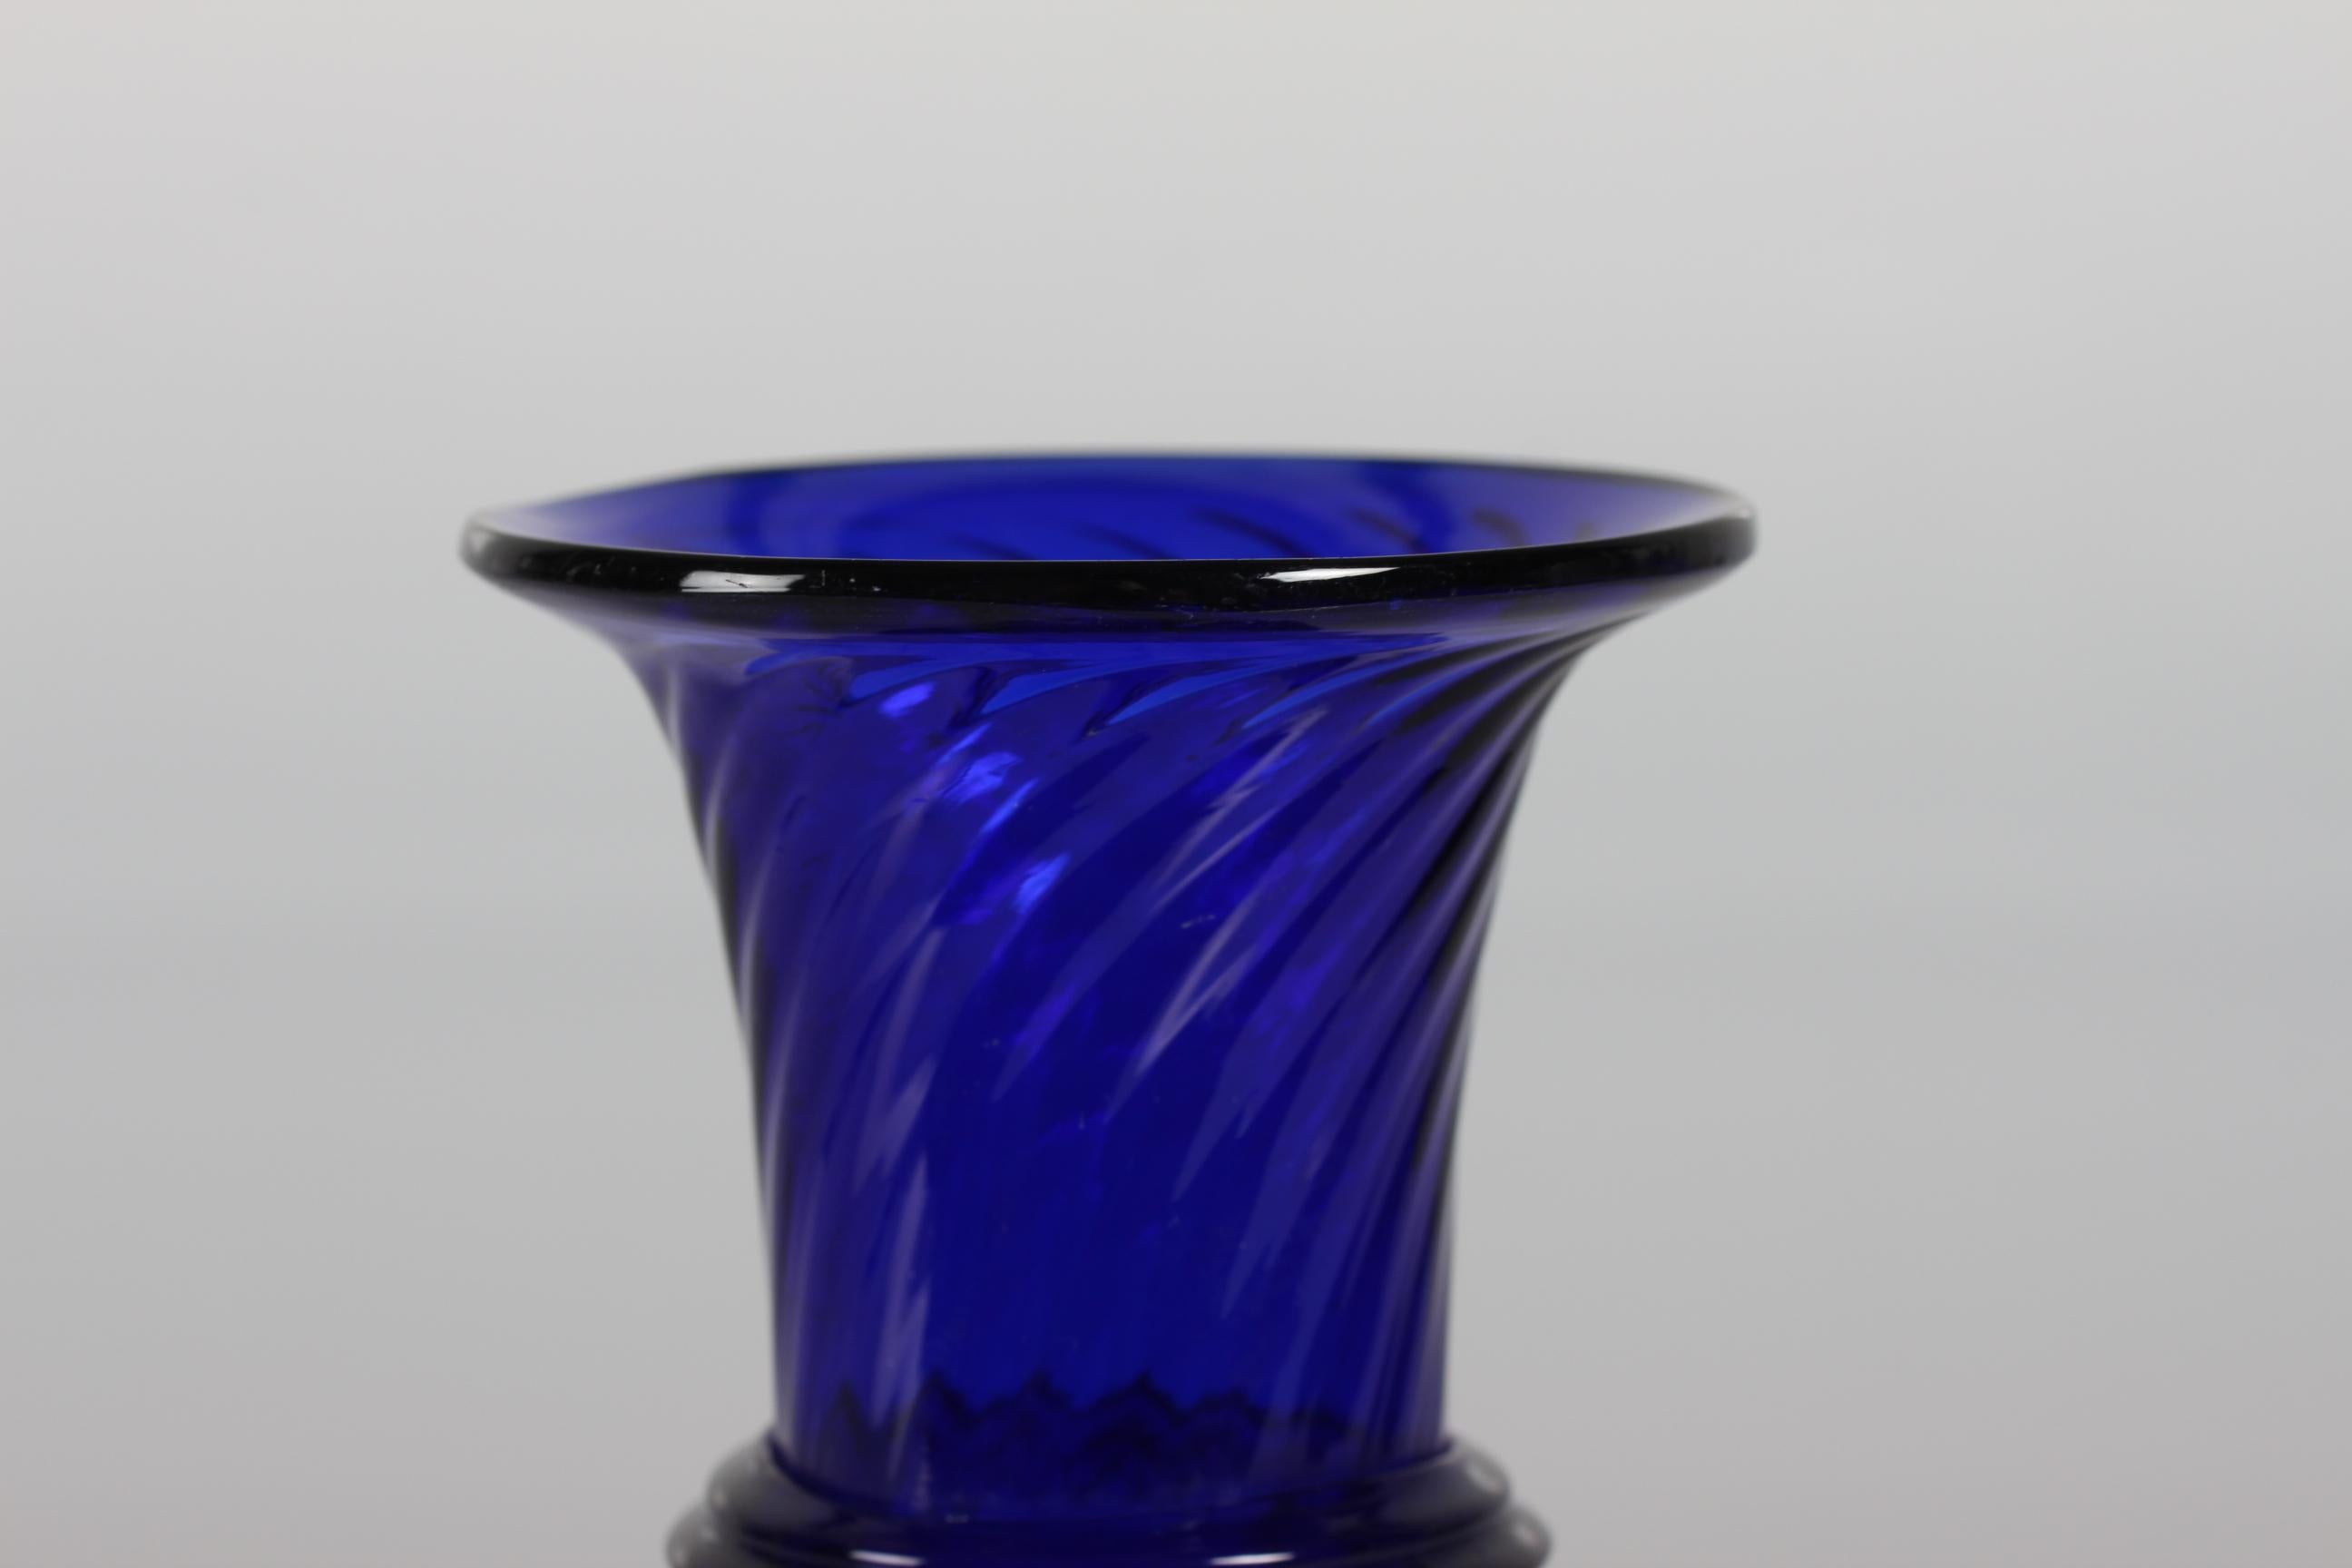 Old Danish hyacinth glass or vase made by Holmegaard or Kastrup glassworks, circa 1900.

The hyacinth glass is made of dark blue mouth blown glass and it has a elegant baluster form on a small foot. There is a lightly twisted pattern in the glass